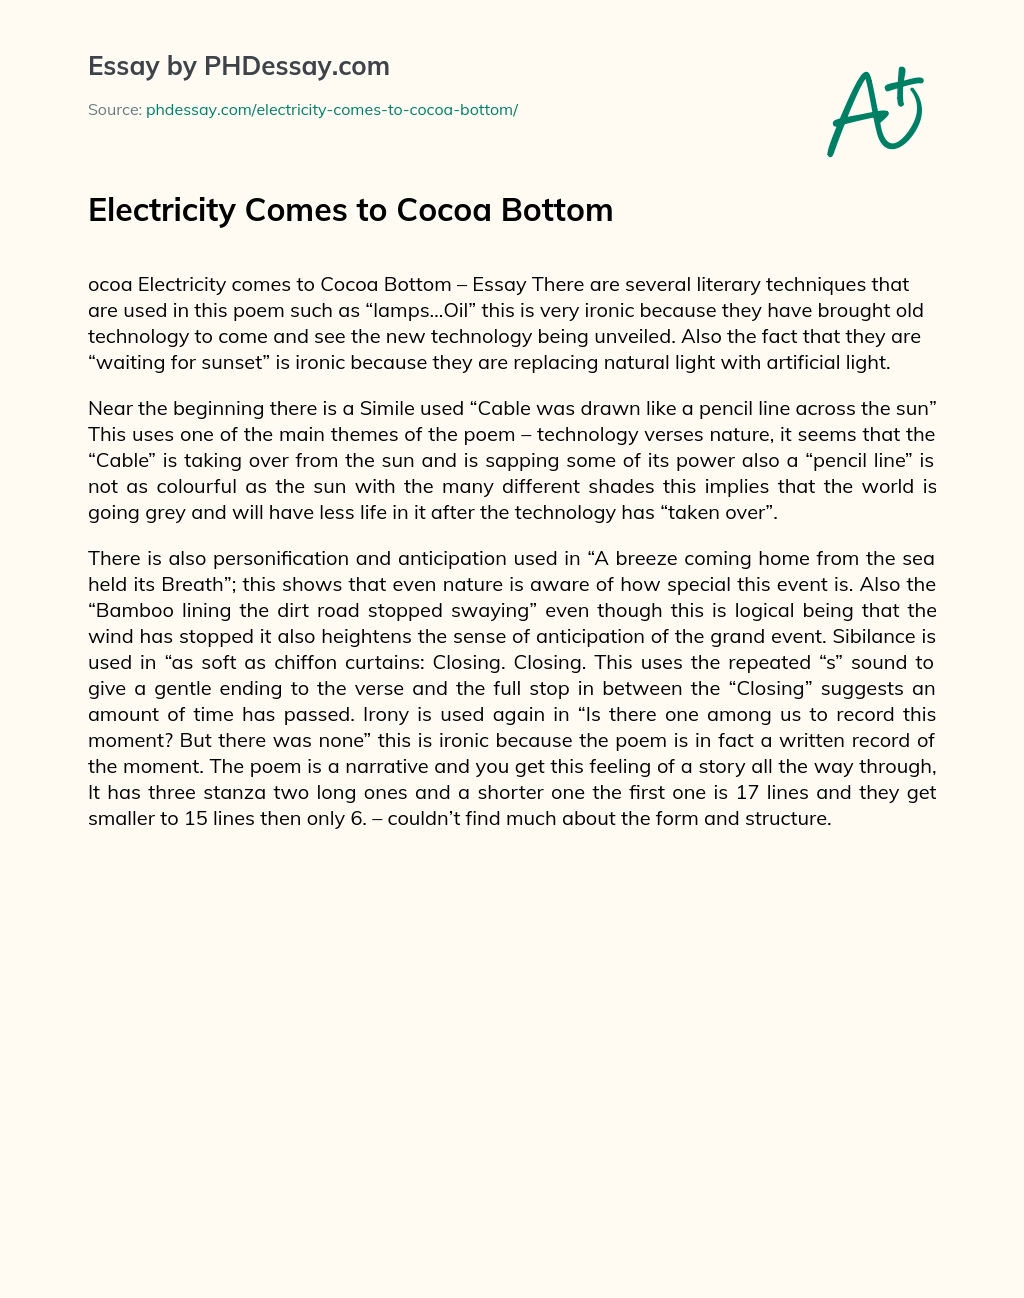 Electricity Comes to Cocoa Bottom essay